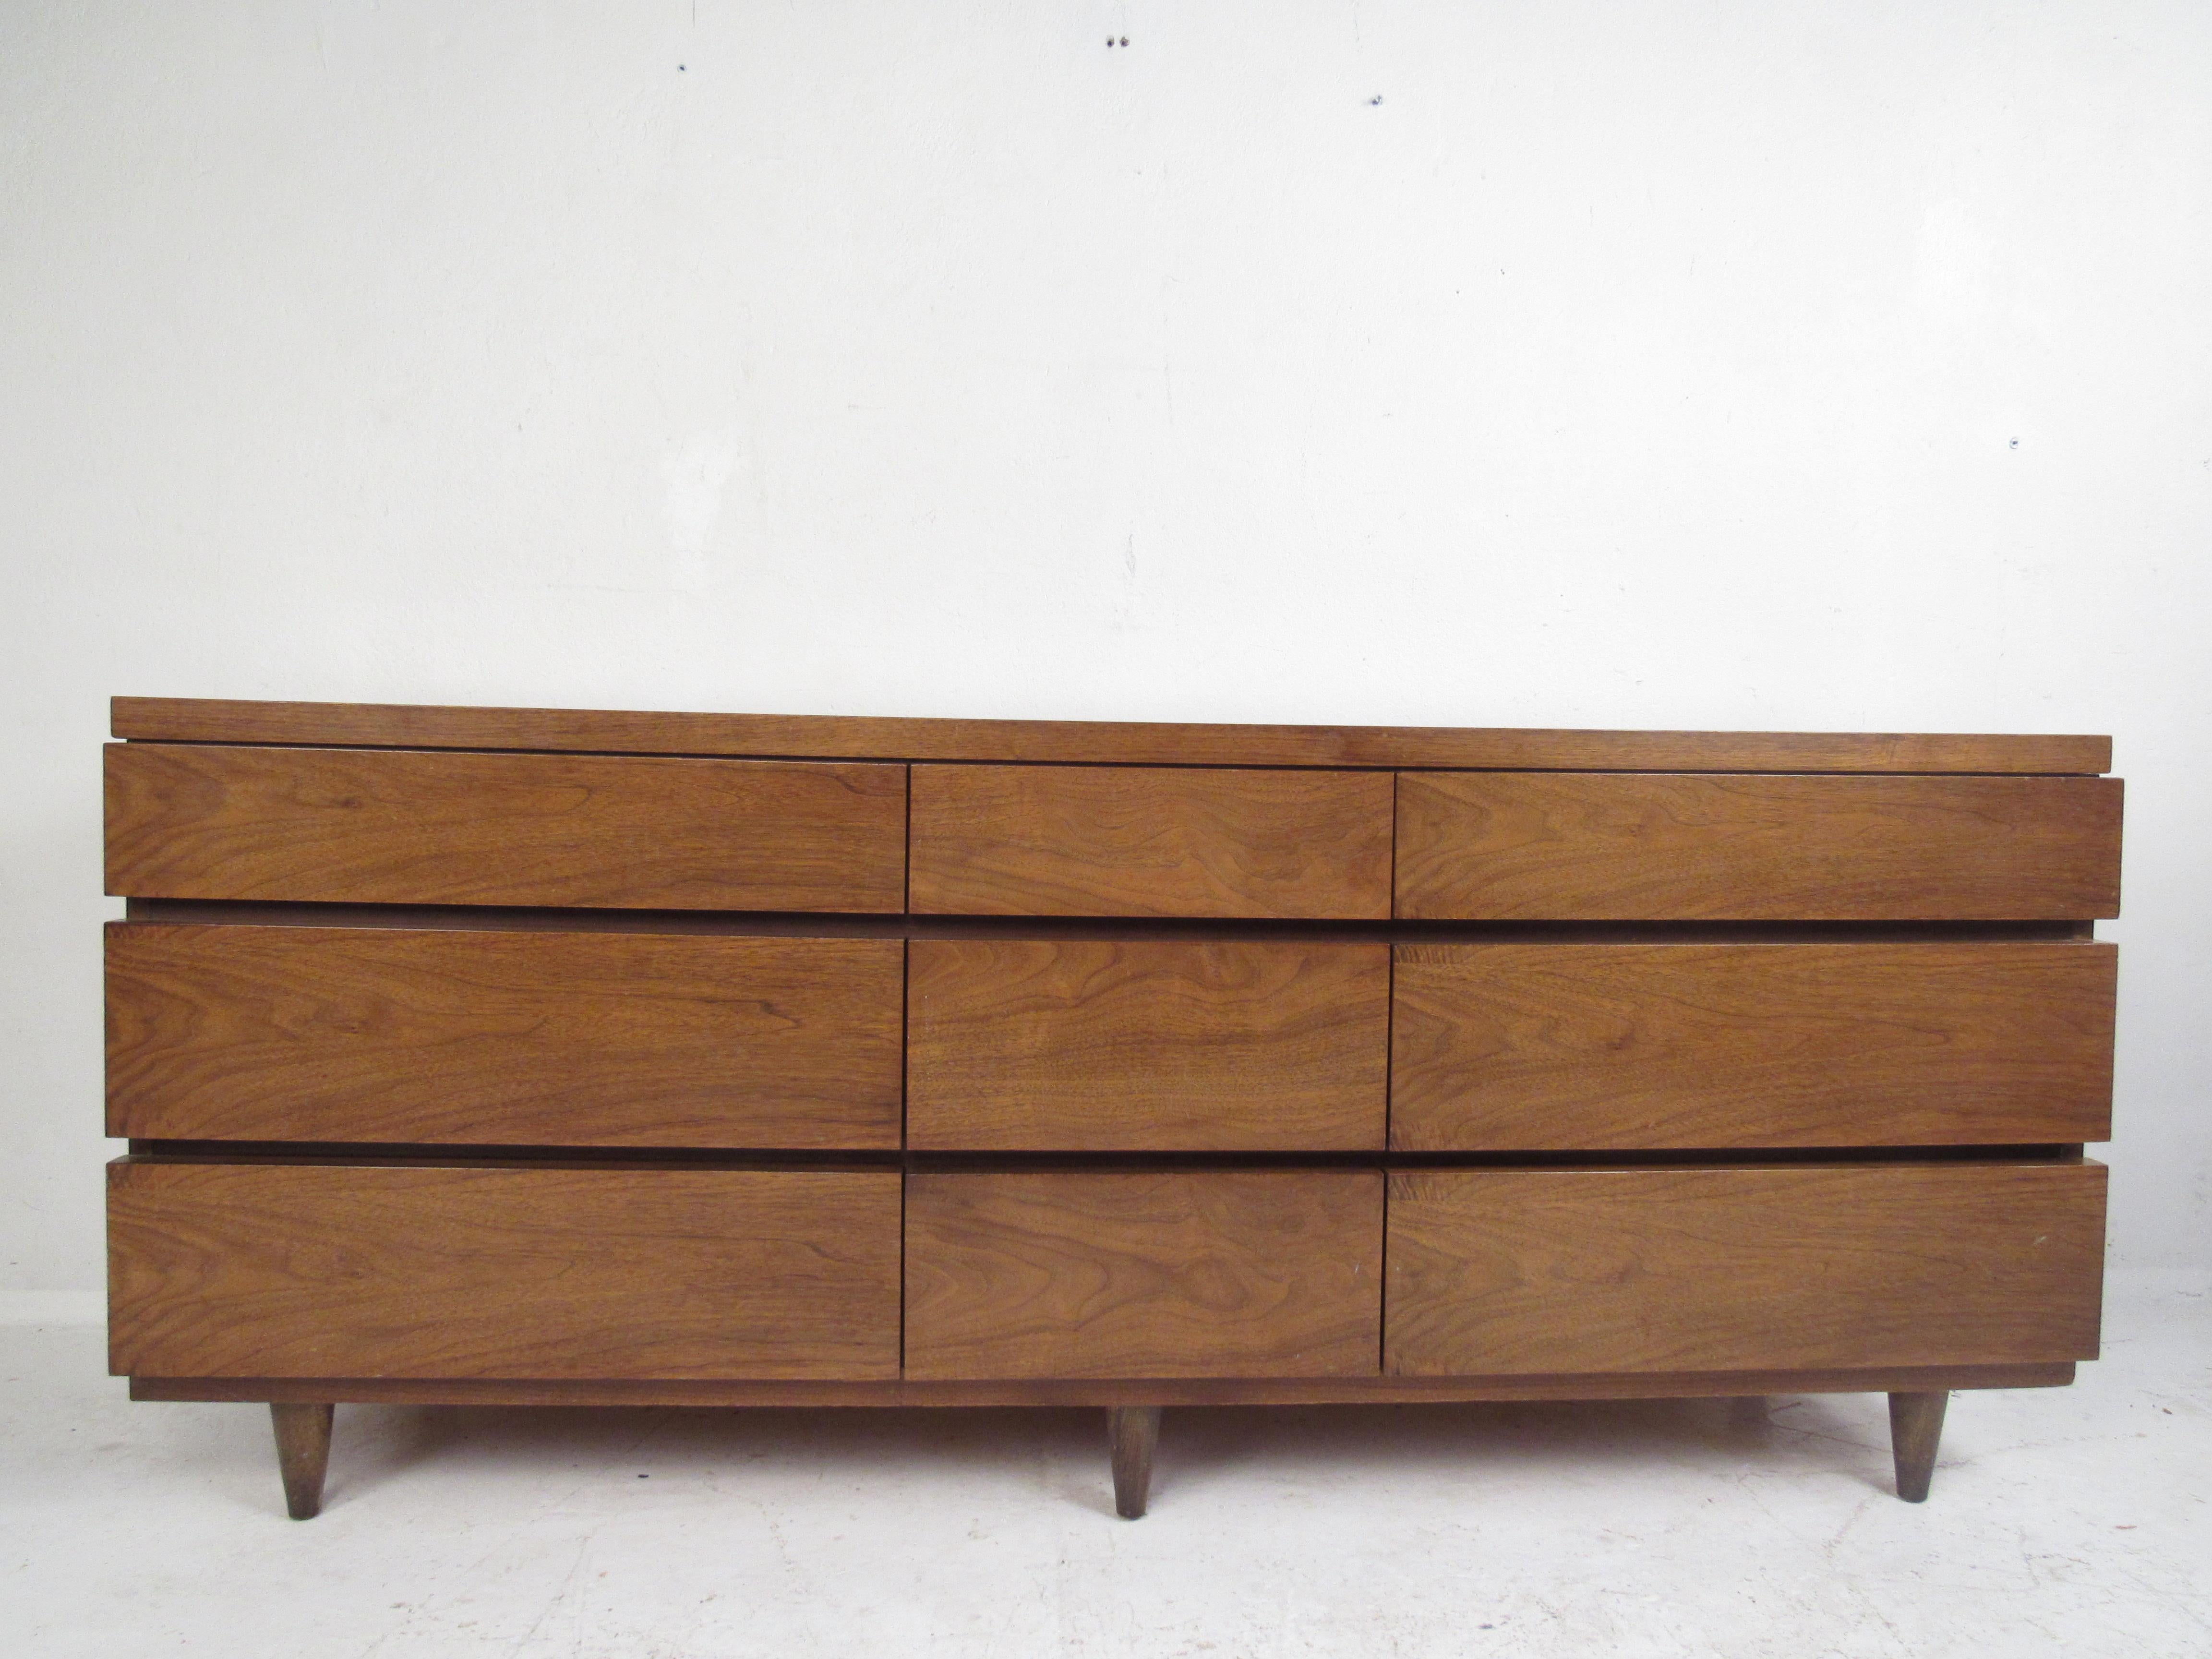 A beautiful vintage modern bedroom set that includes a low dresser and highboy dresser. This lovely bedroom set offers plenty of room for storage without sacrificing style. Quality craftsmanship with elegant walnut wood grain, hidden drawer pulls,